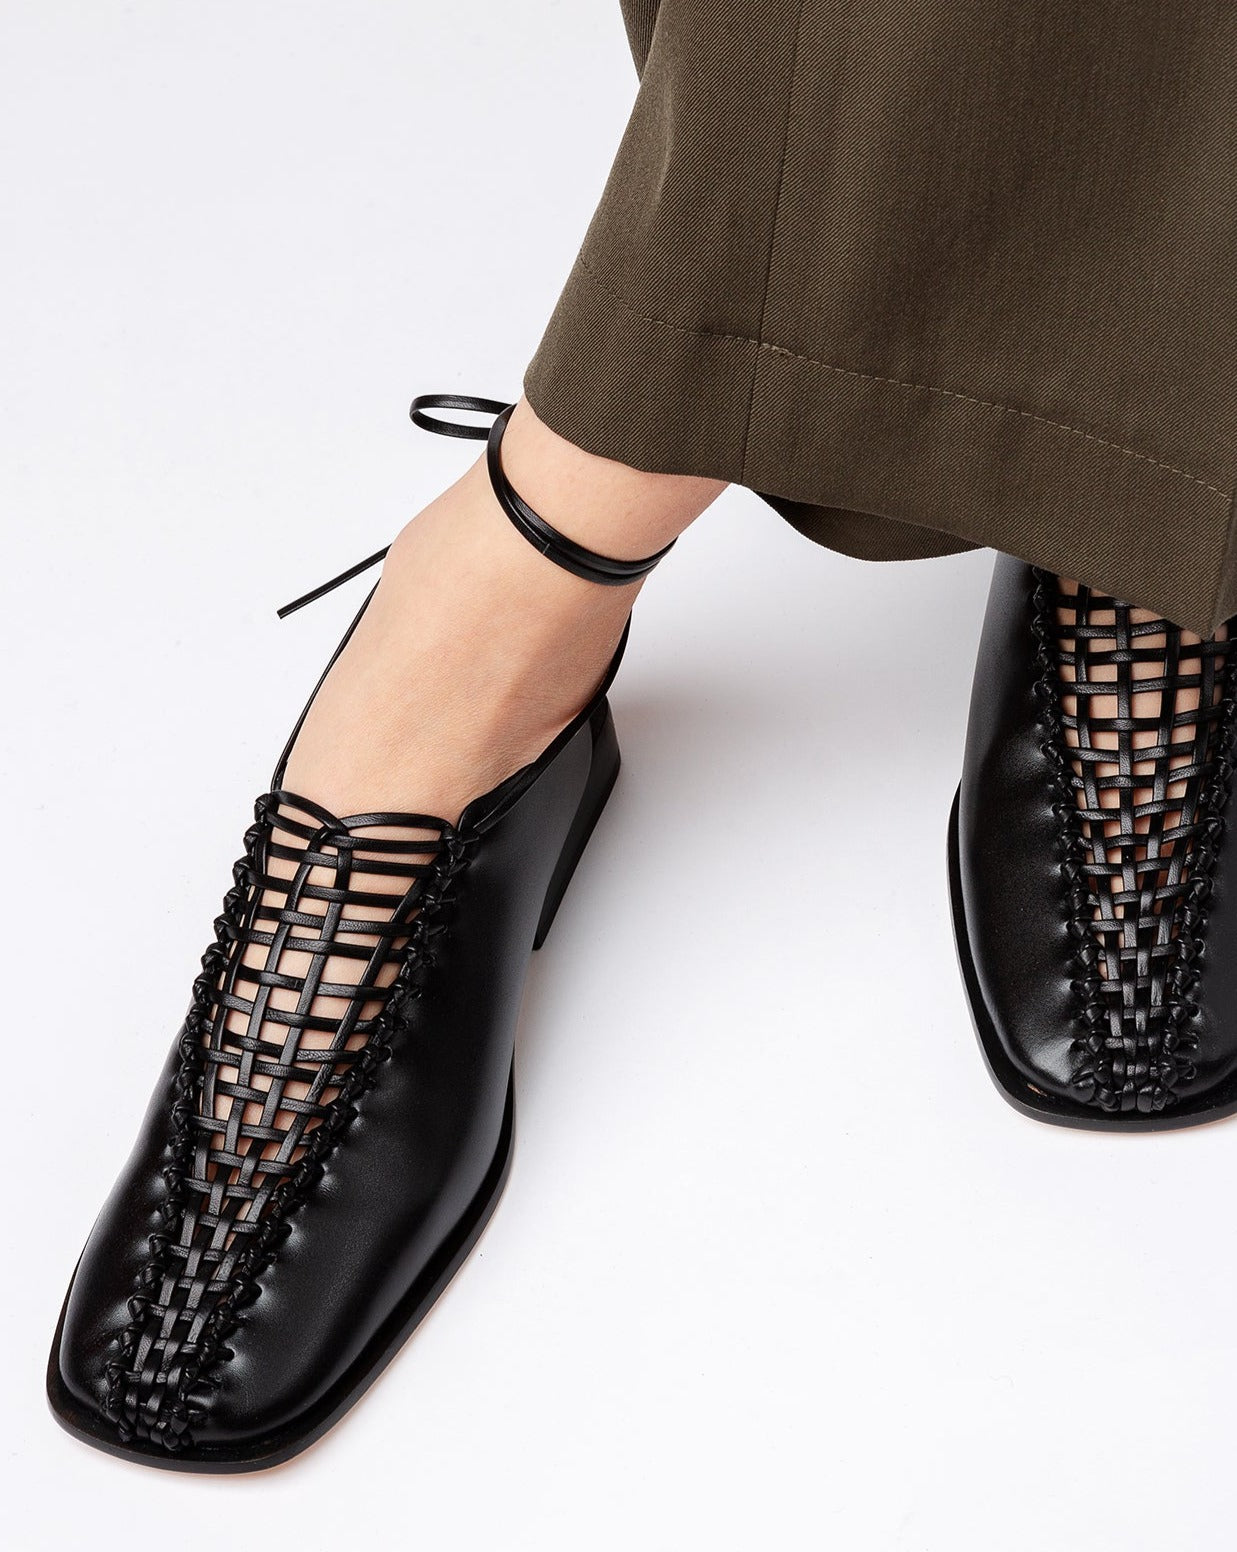 TONIA - Woven Ankle-Lace Mule